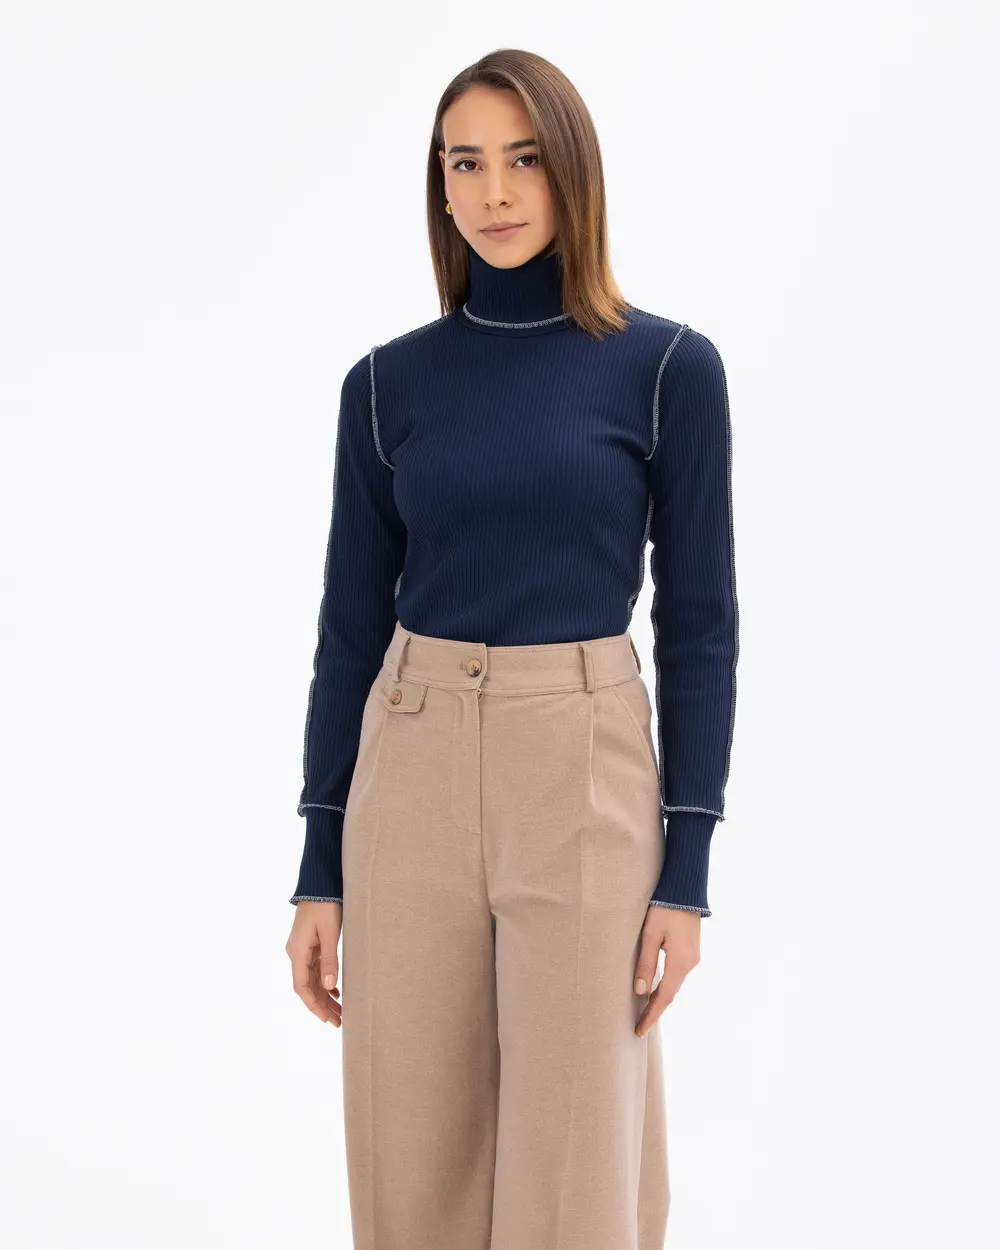 Knitted Blouse with Standing Collar Stitching Detailed